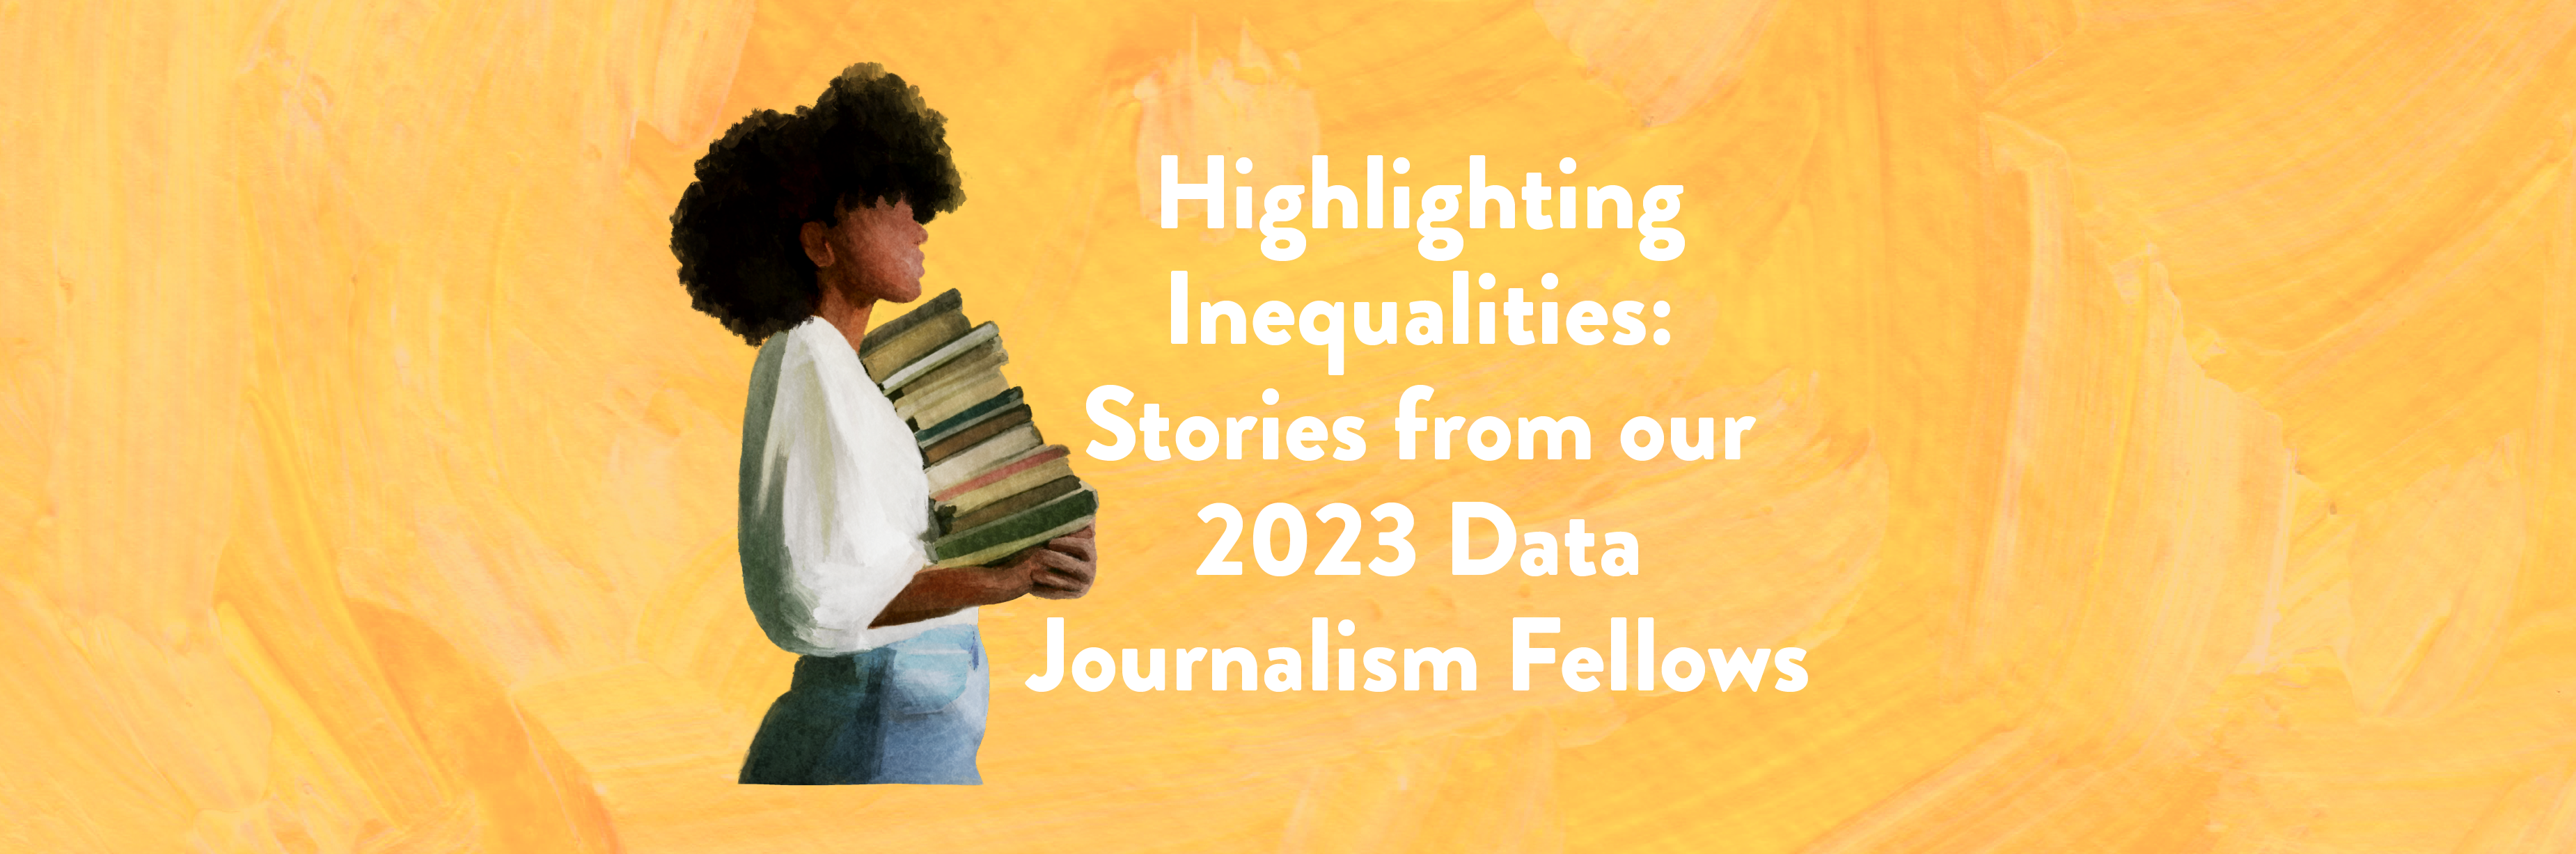 Highlighting Inequalities: Stories from our 2023 Data Journalism Fellows